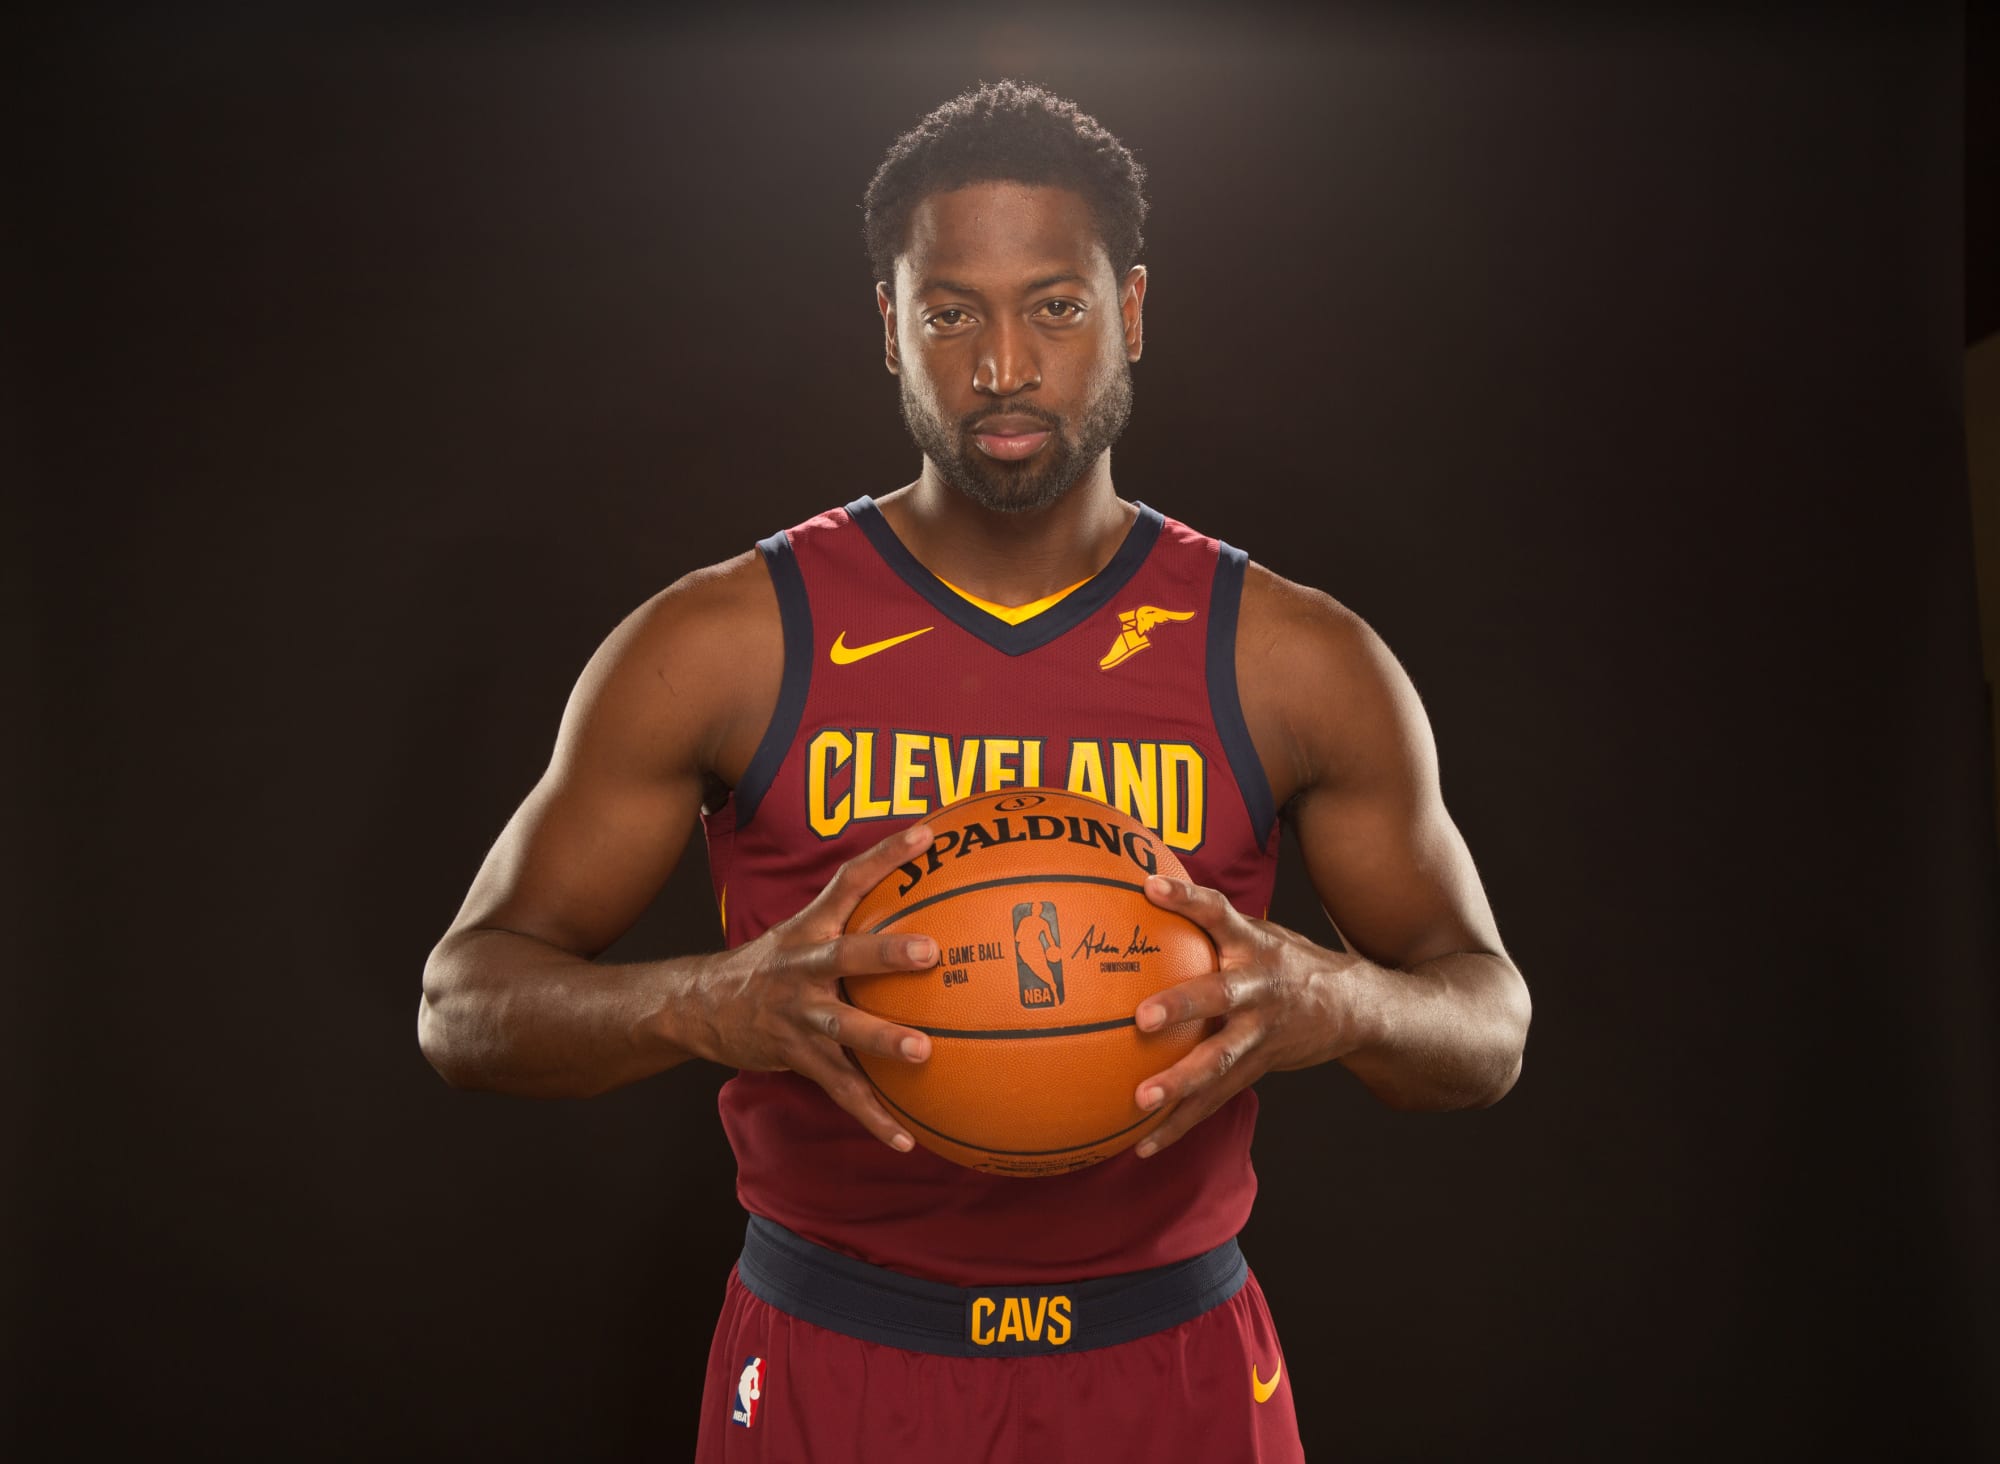 Cleveland Cavaliers Dwyane Wade's role for the 20172018 season